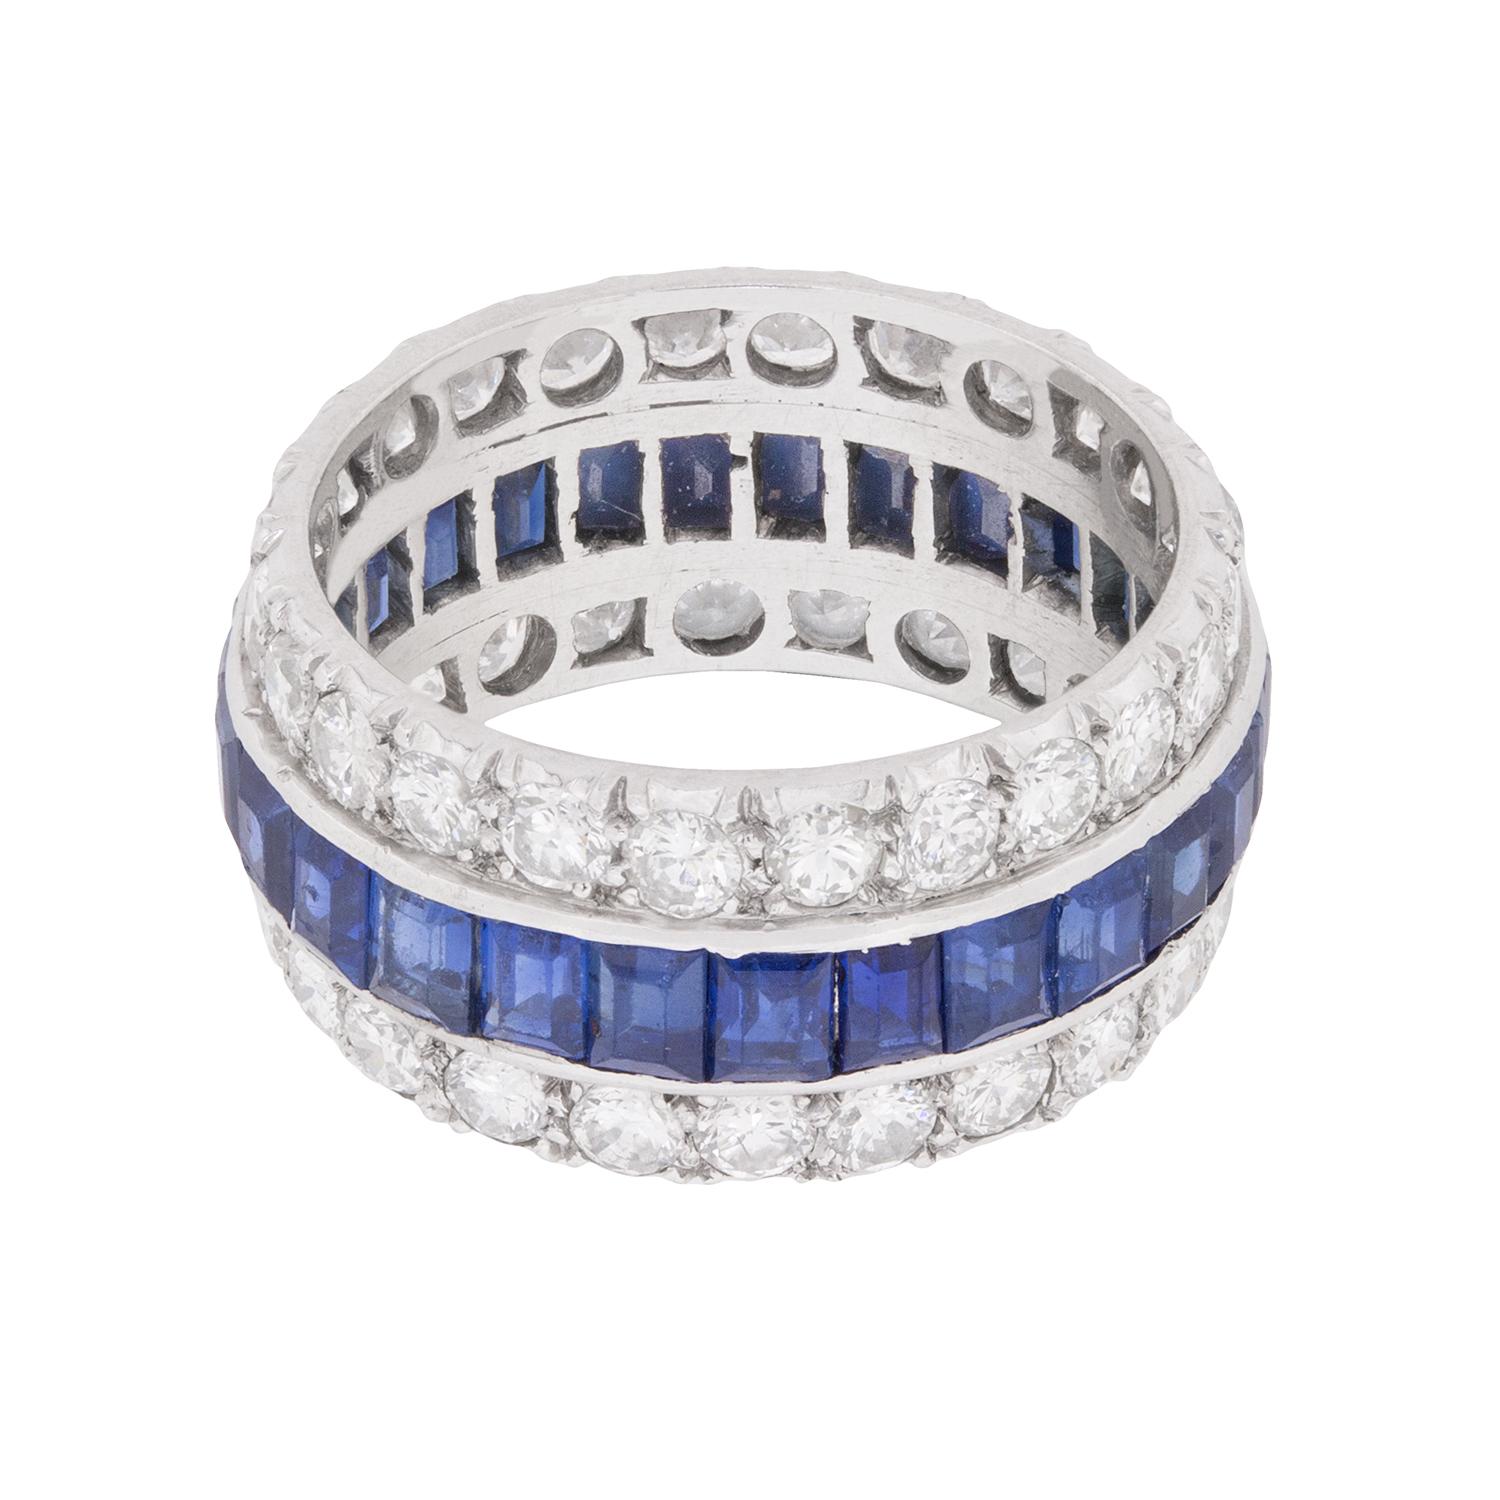 Baguette Cut Late Deco Sapphire and Diamond Eternity Ring, circa 1930s For Sale